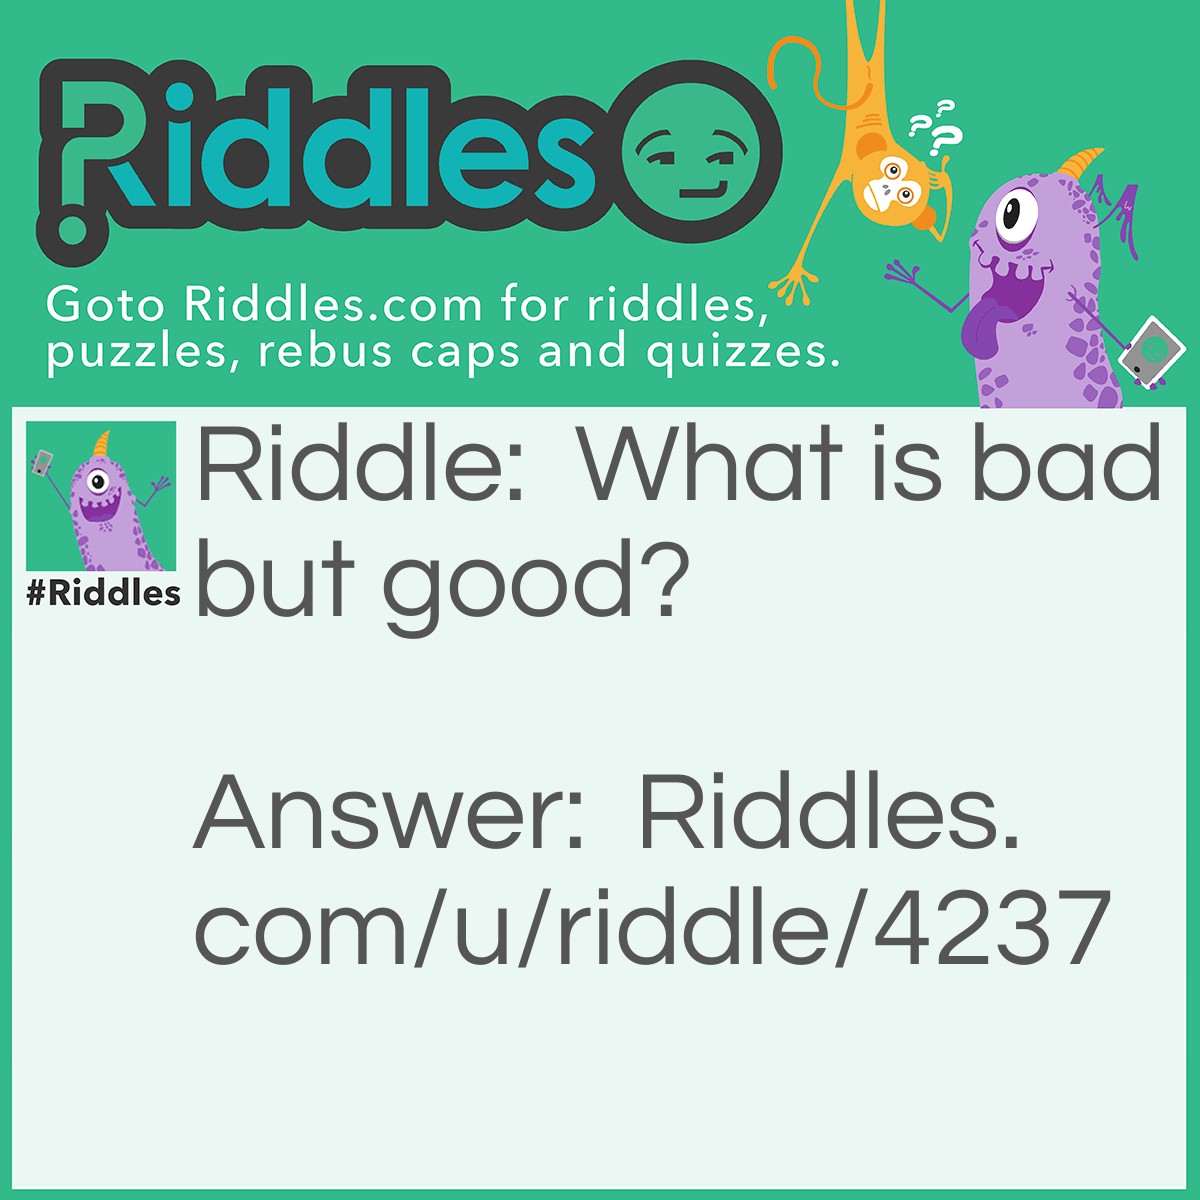 Riddle: What is bad but good? Answer: Mistakes.